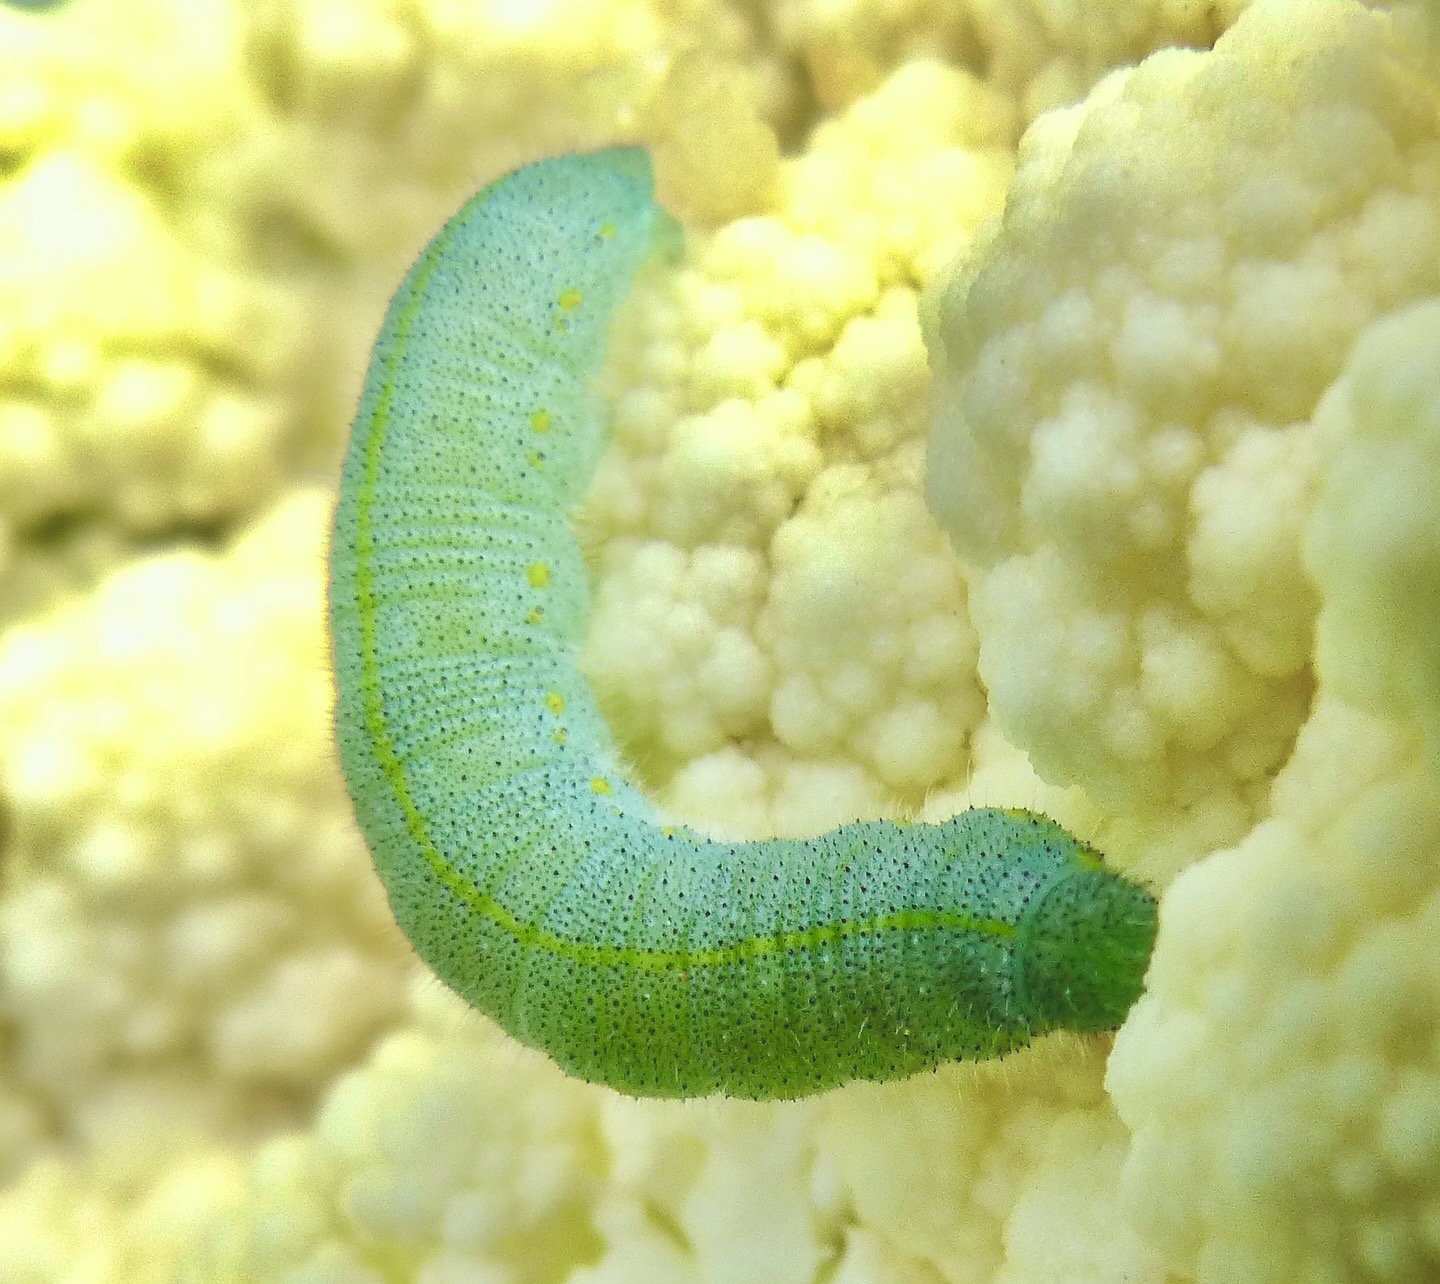 Caterpillar of the small cabbage white butterfly